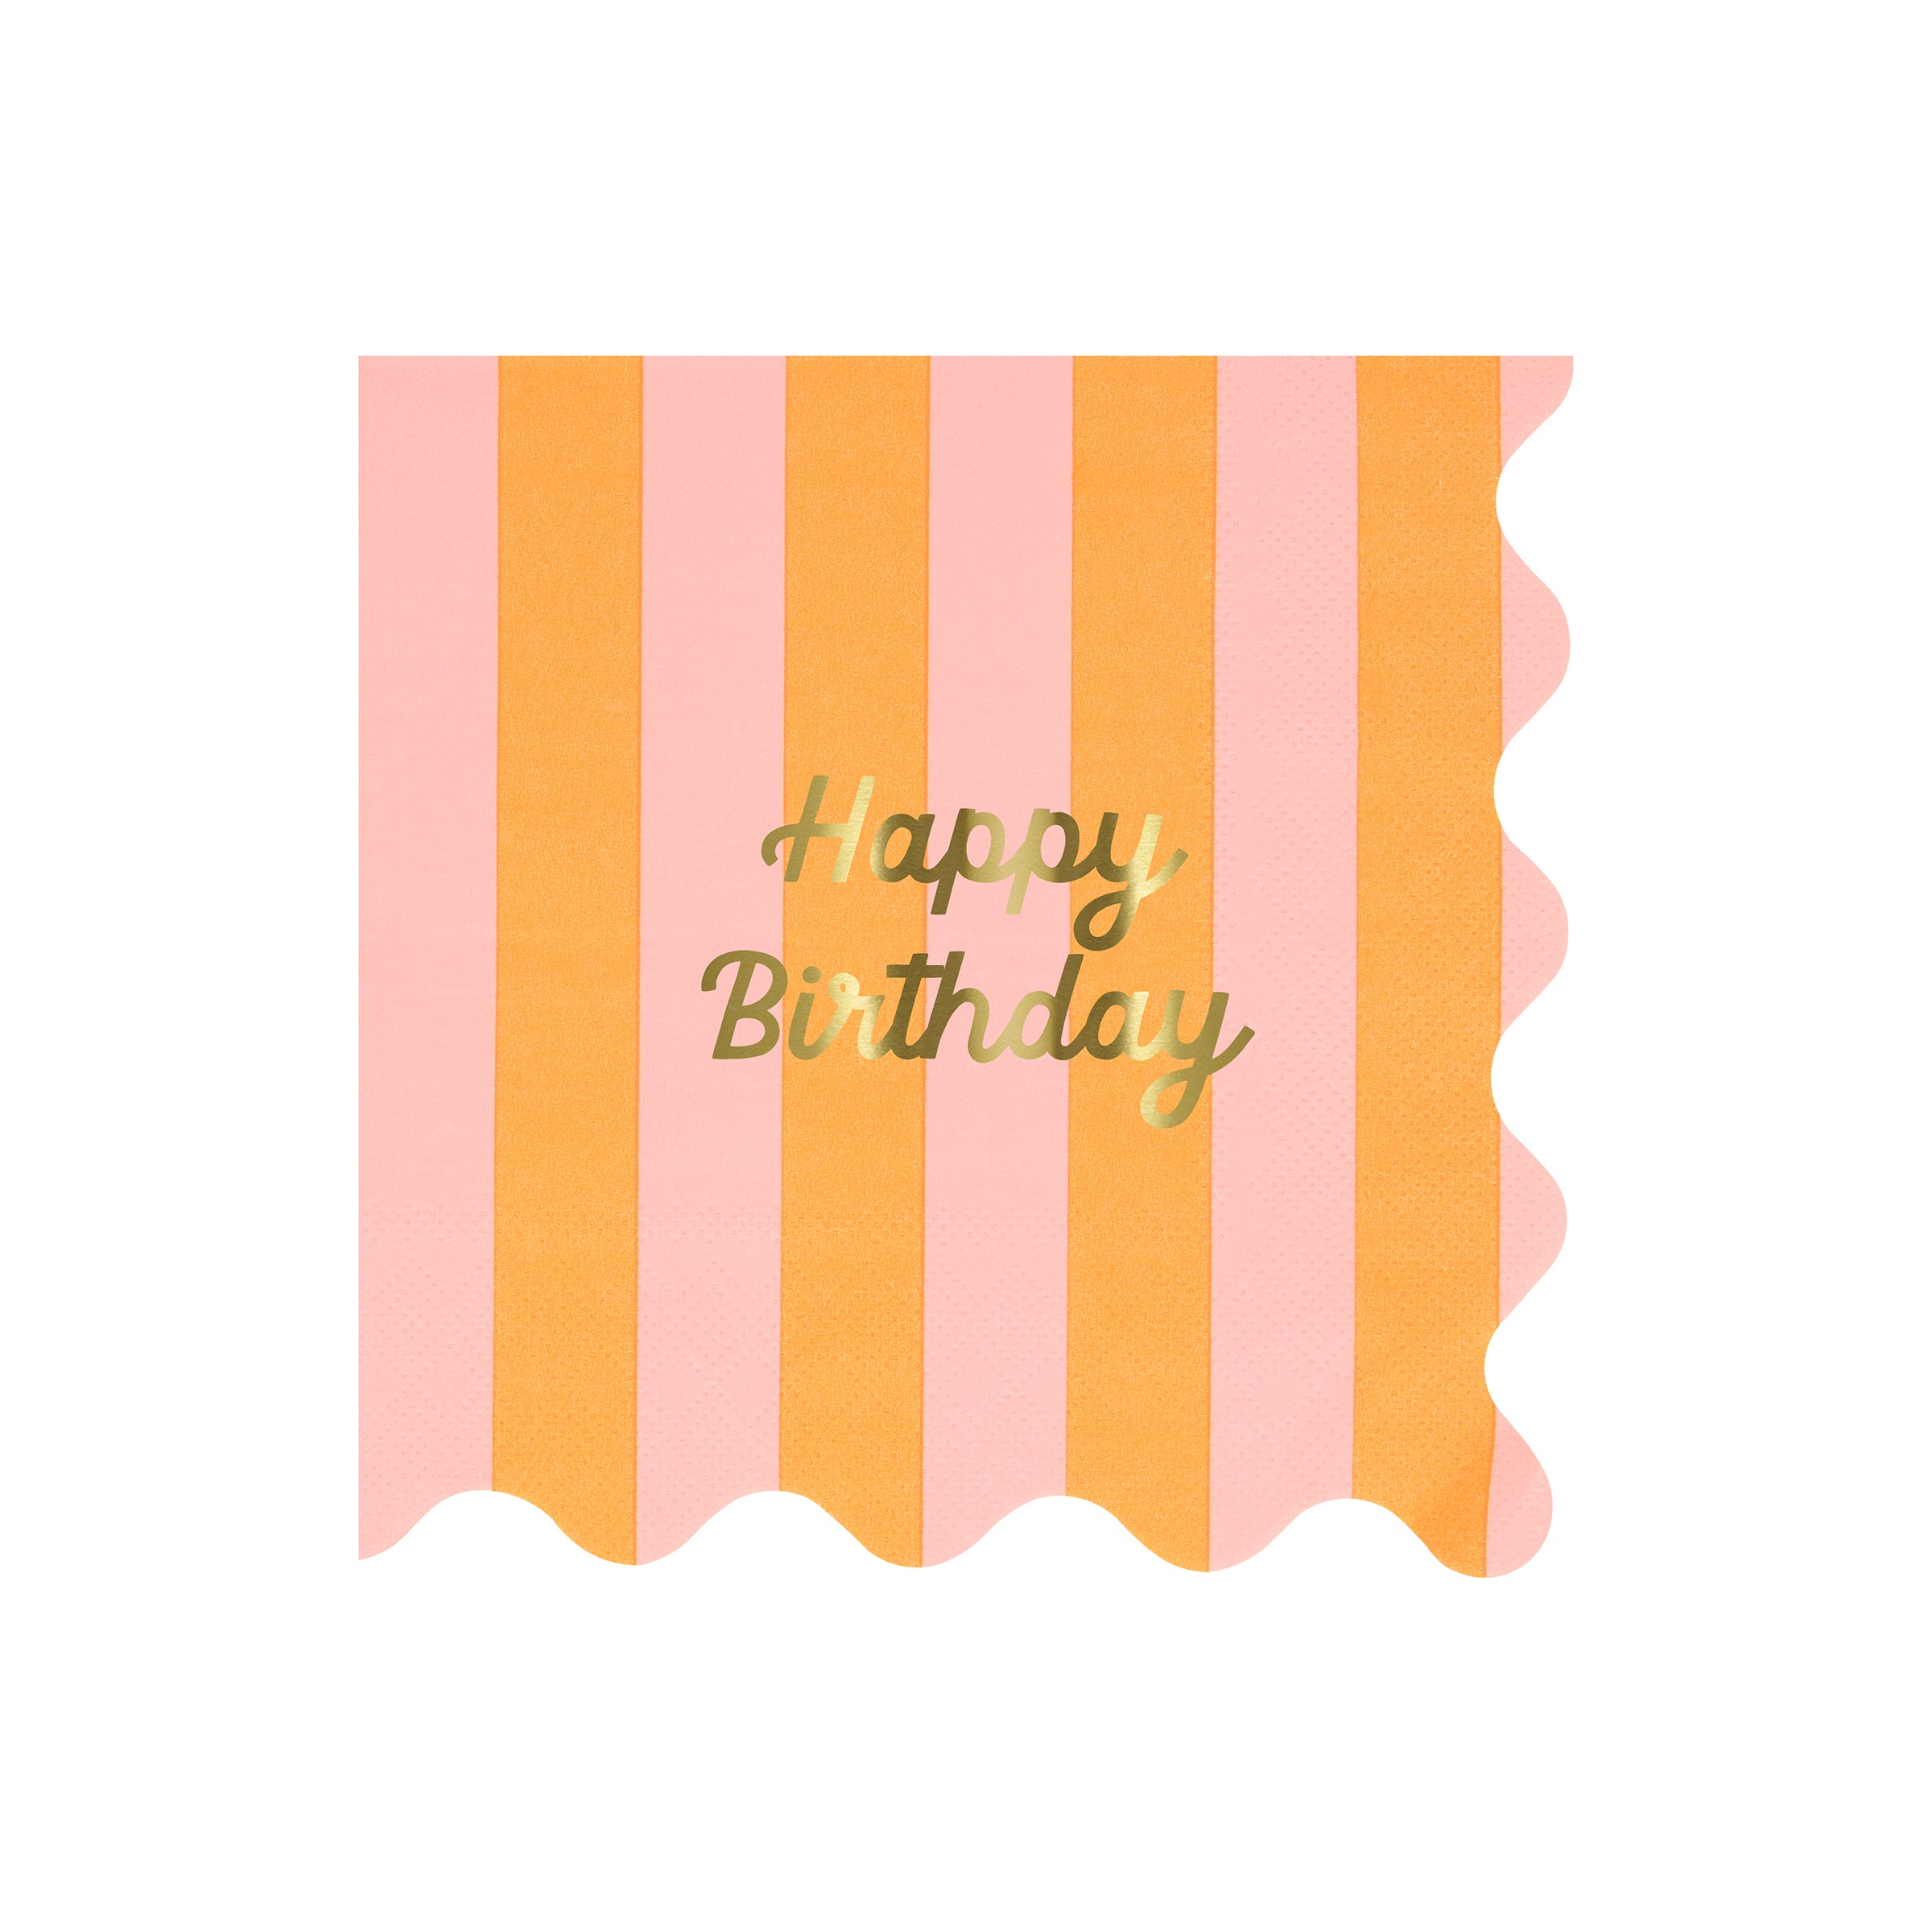 Our large striped party napkins have the words Happy Birthday on them in shiny gold foil.